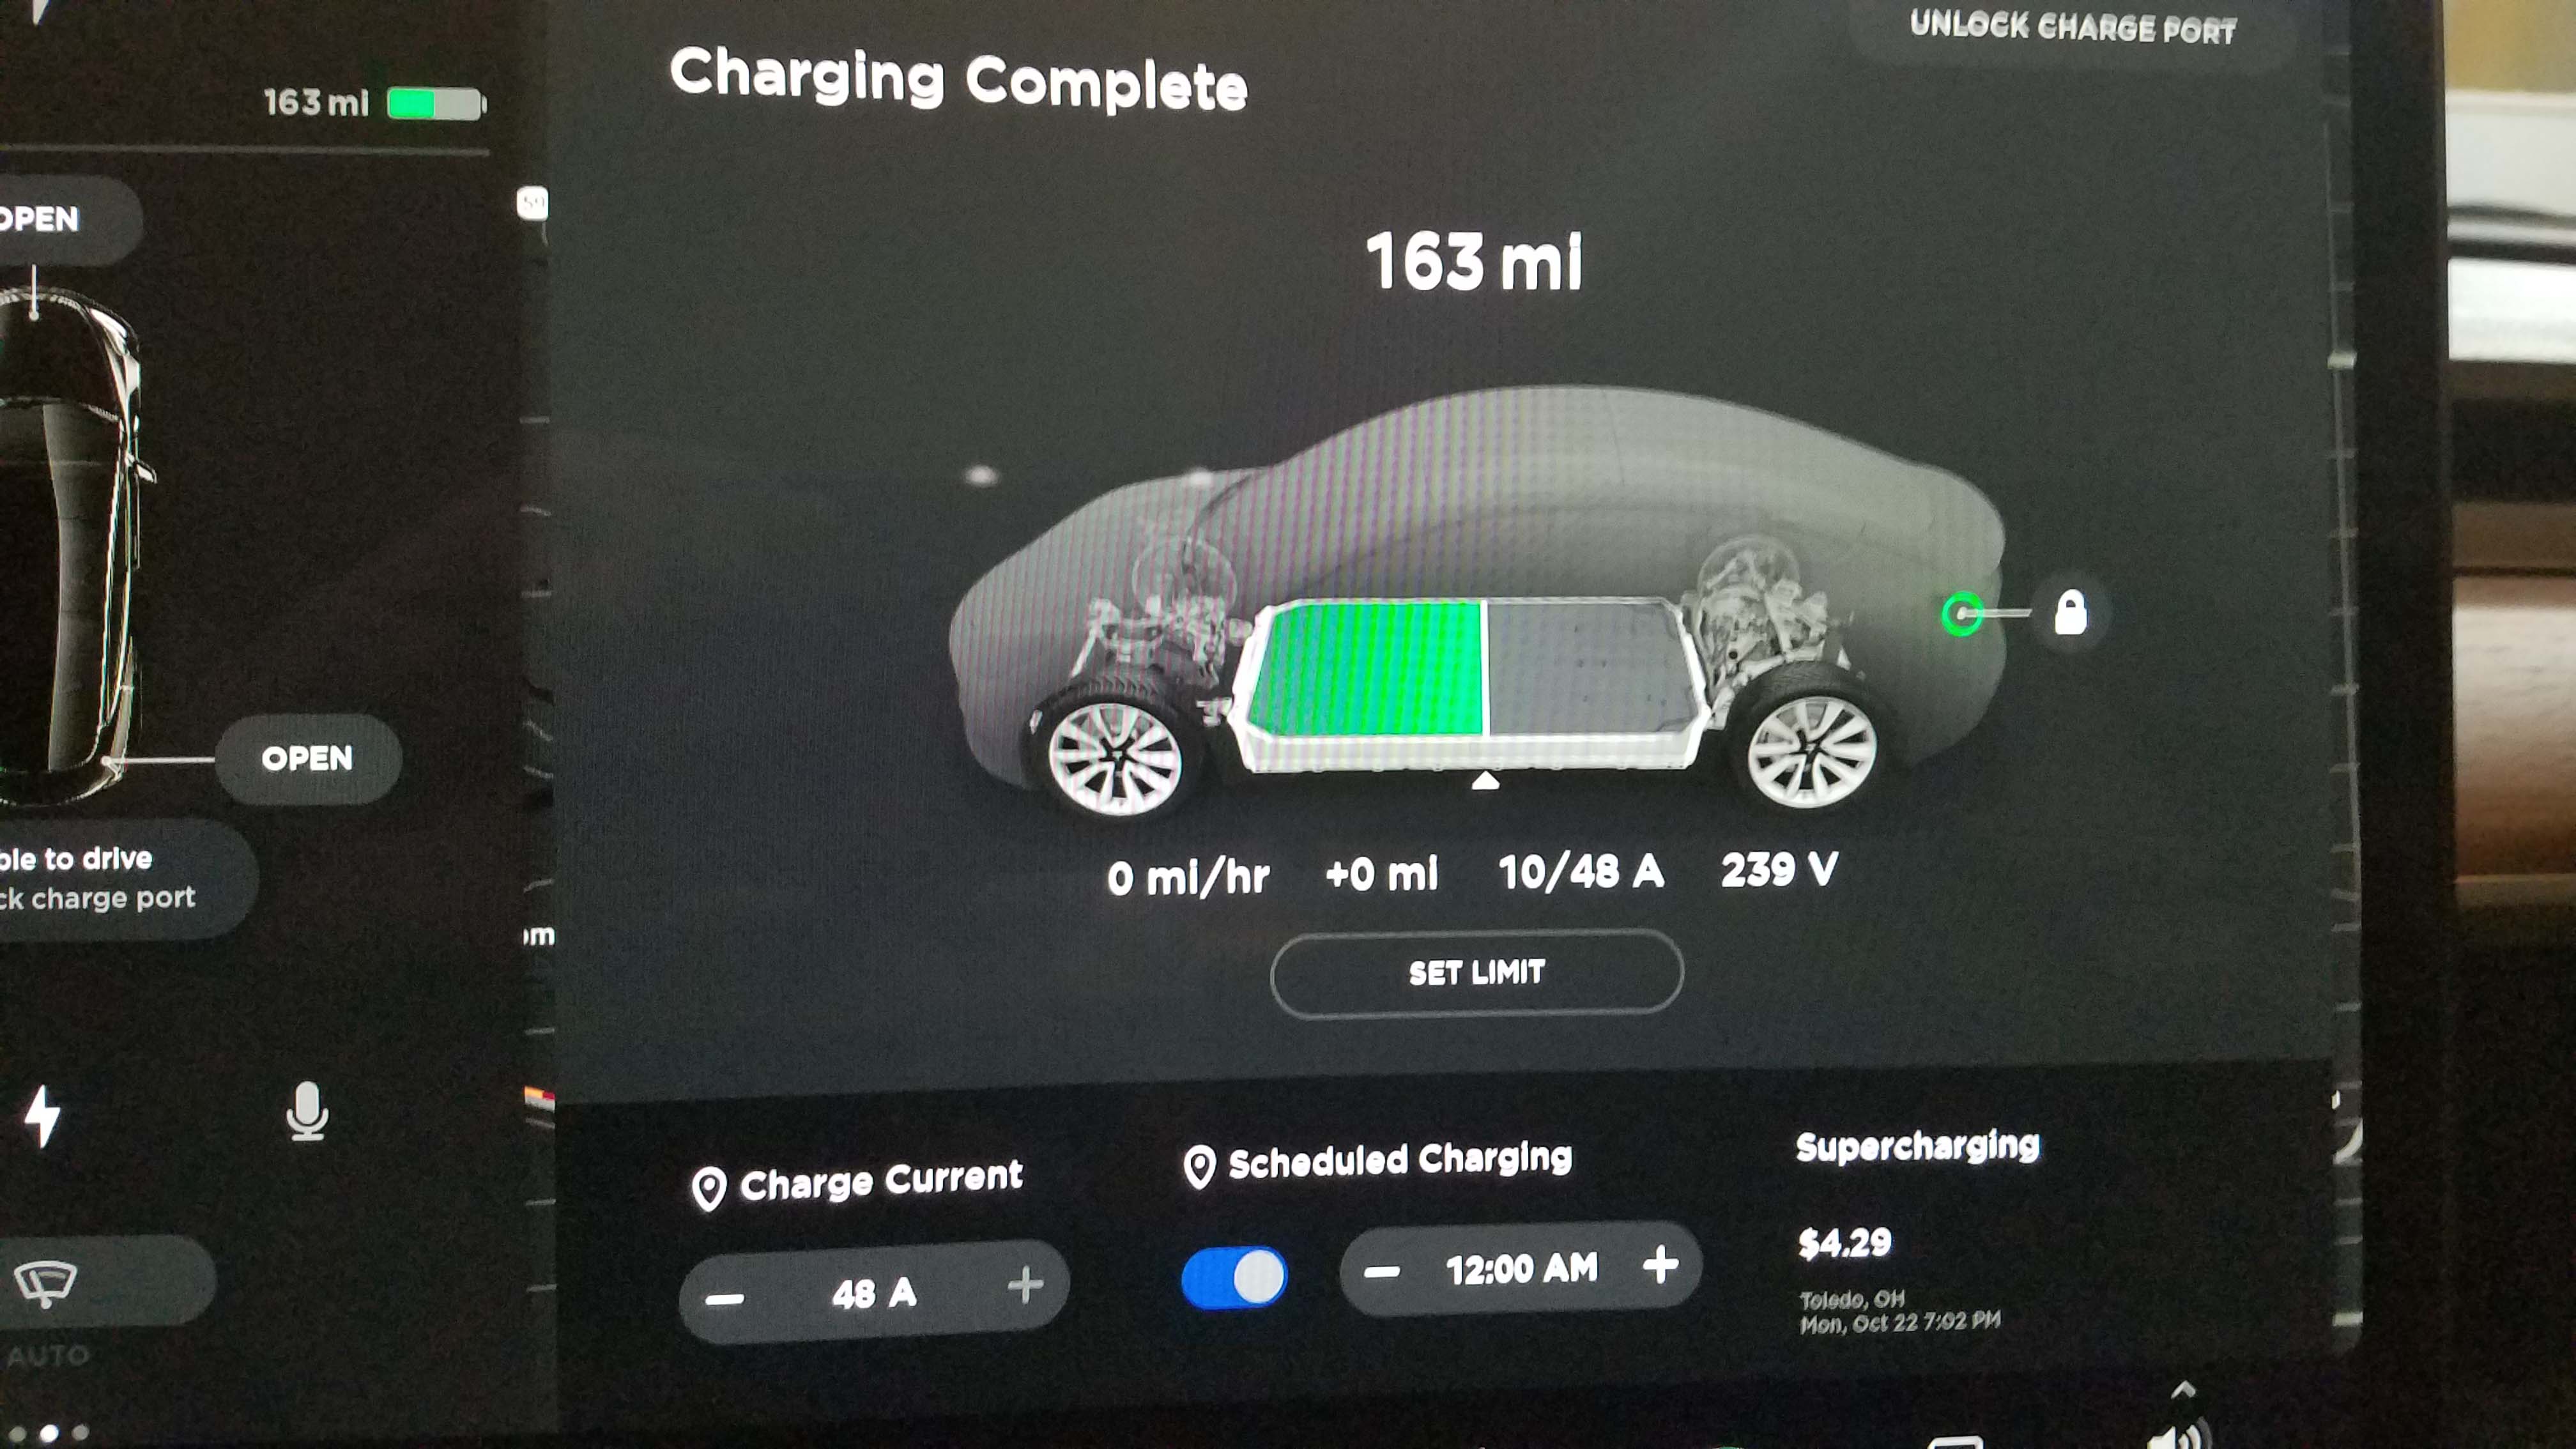 Charging for the Tesla Model 3 can be set automatically. It can also be controlled remotely via a phone app.